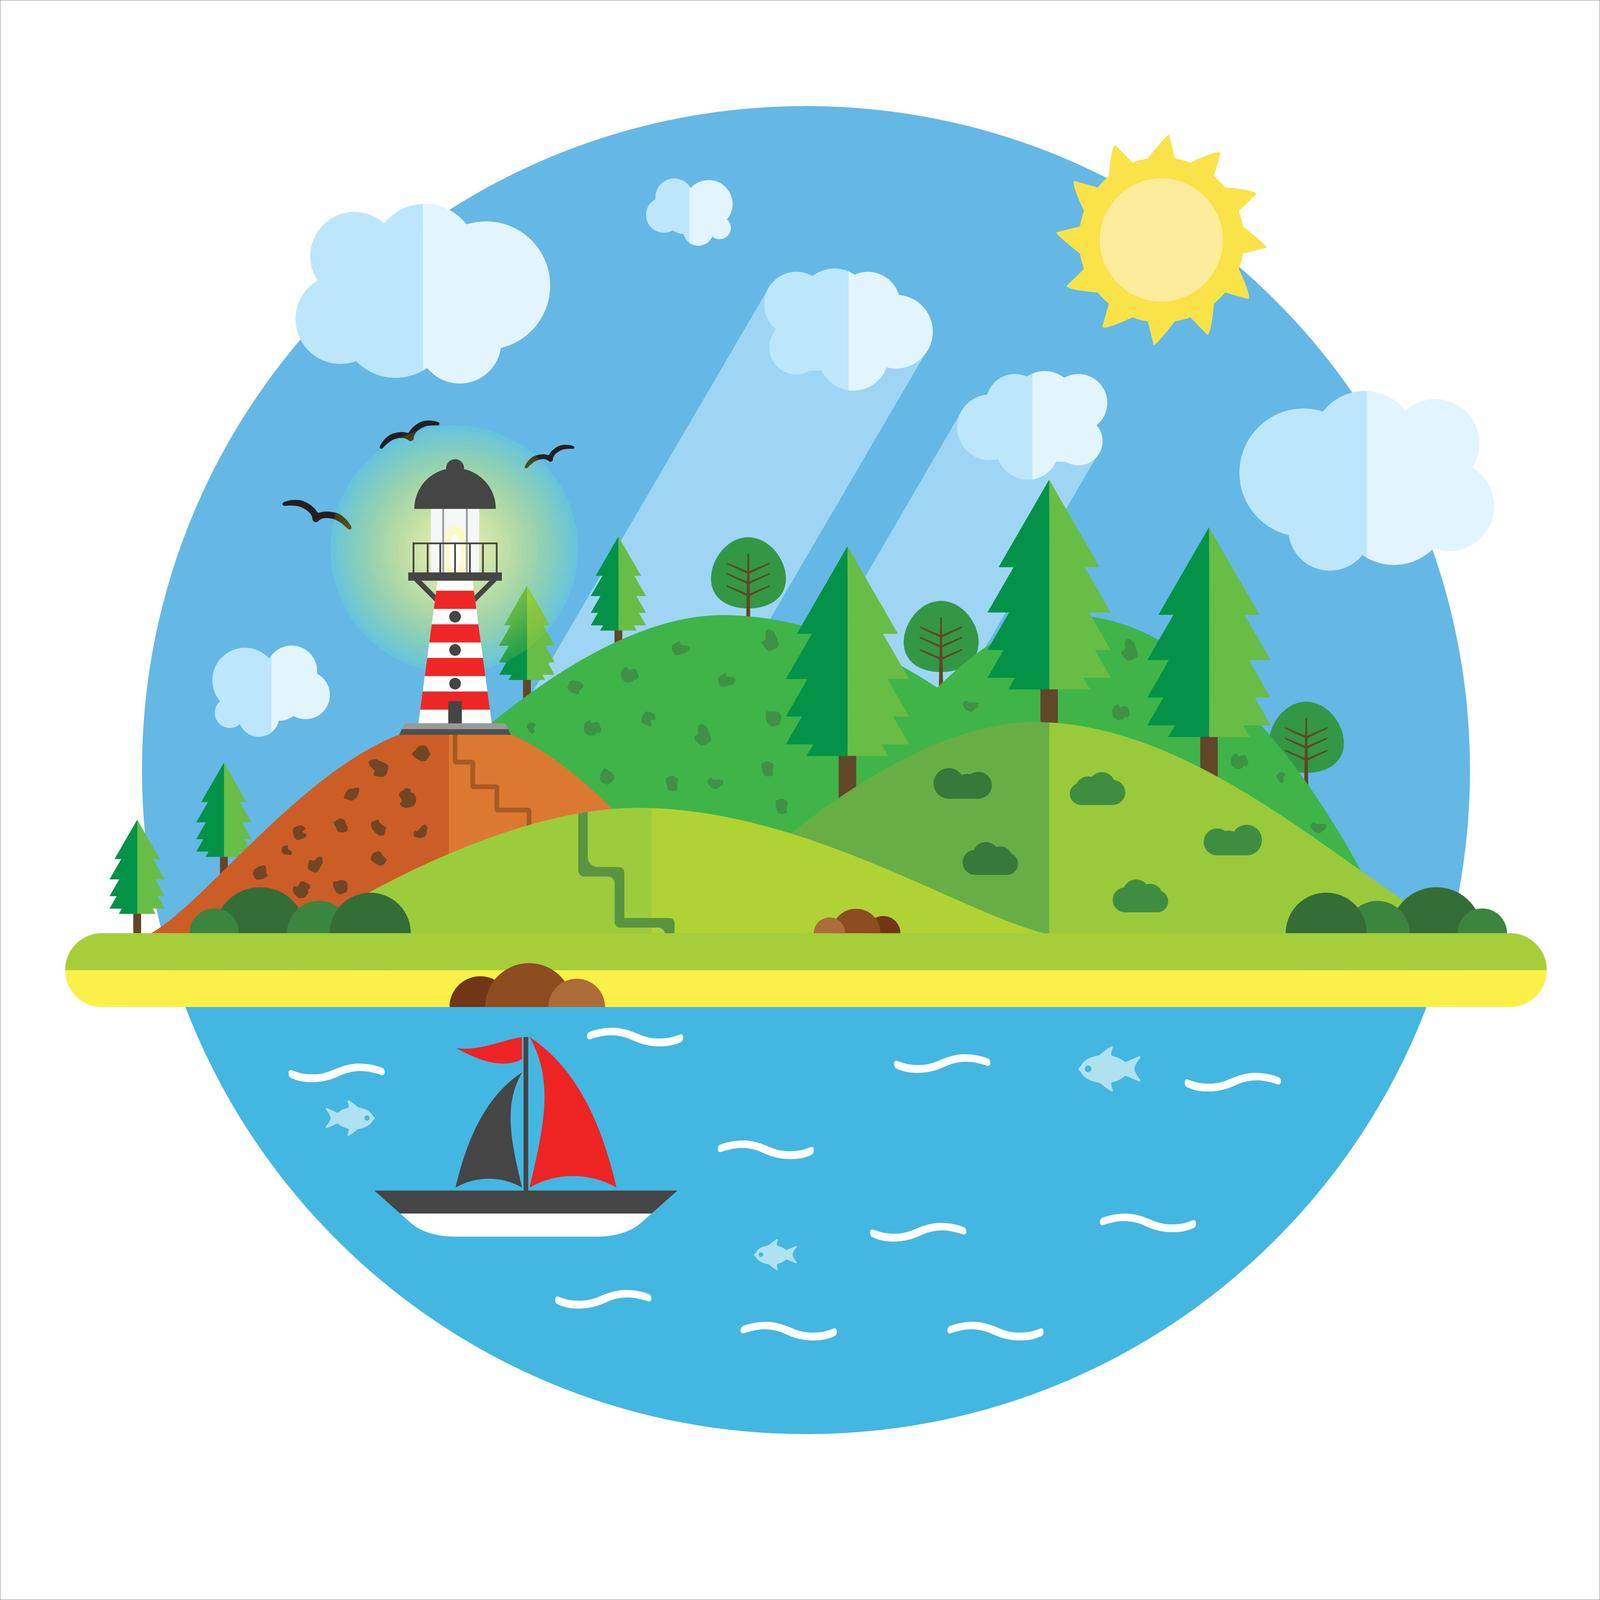 Vacation in the sea with lighthouse, hill, tree, mountain, fish and sailing ship. Summer time holiday voyage concept. Illustration in flat style. Travel background. by LysenkoA